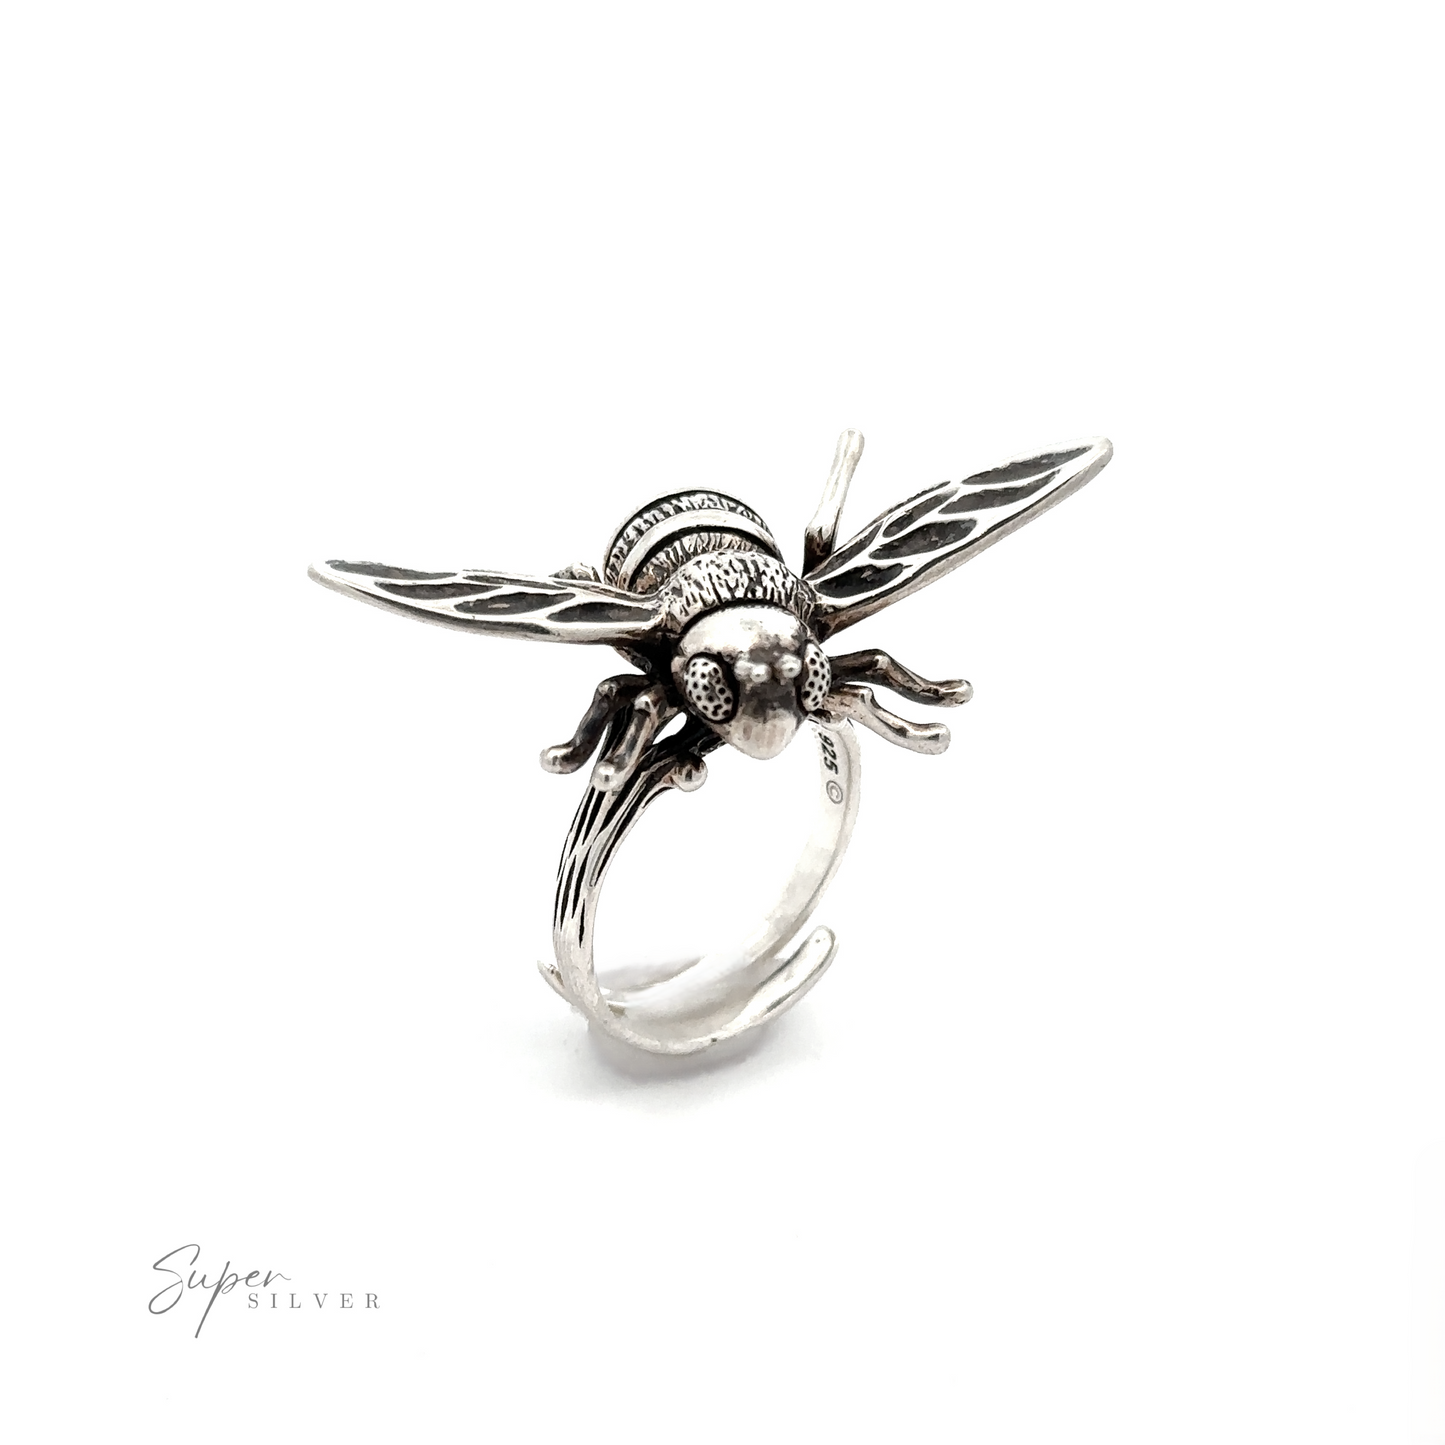 
                  
                    A Large Bee Ring made from .925 silver features a detailed, three-dimensional bee design with outspread wings on a white background. The name "Super Silver" appears in small text at the bottom left.
                  
                